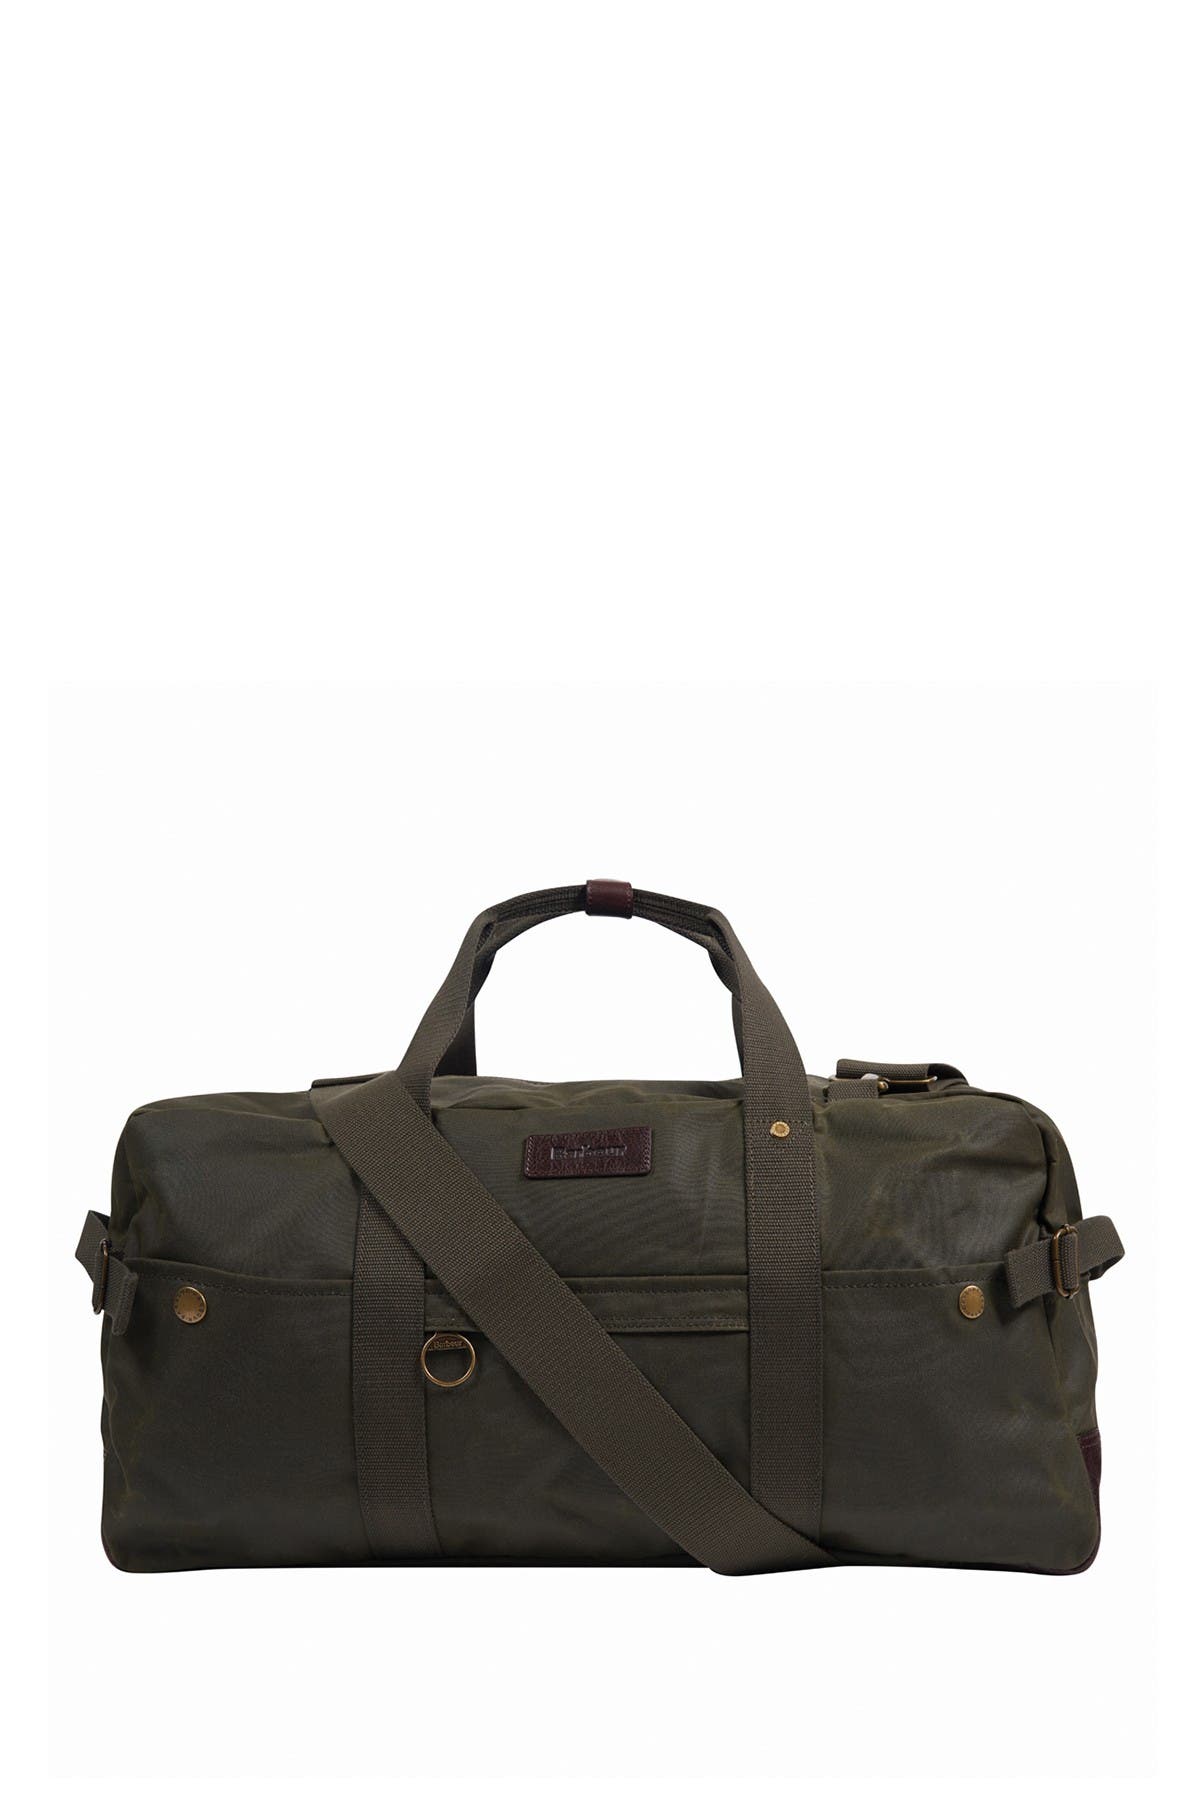 barbour overnight bag